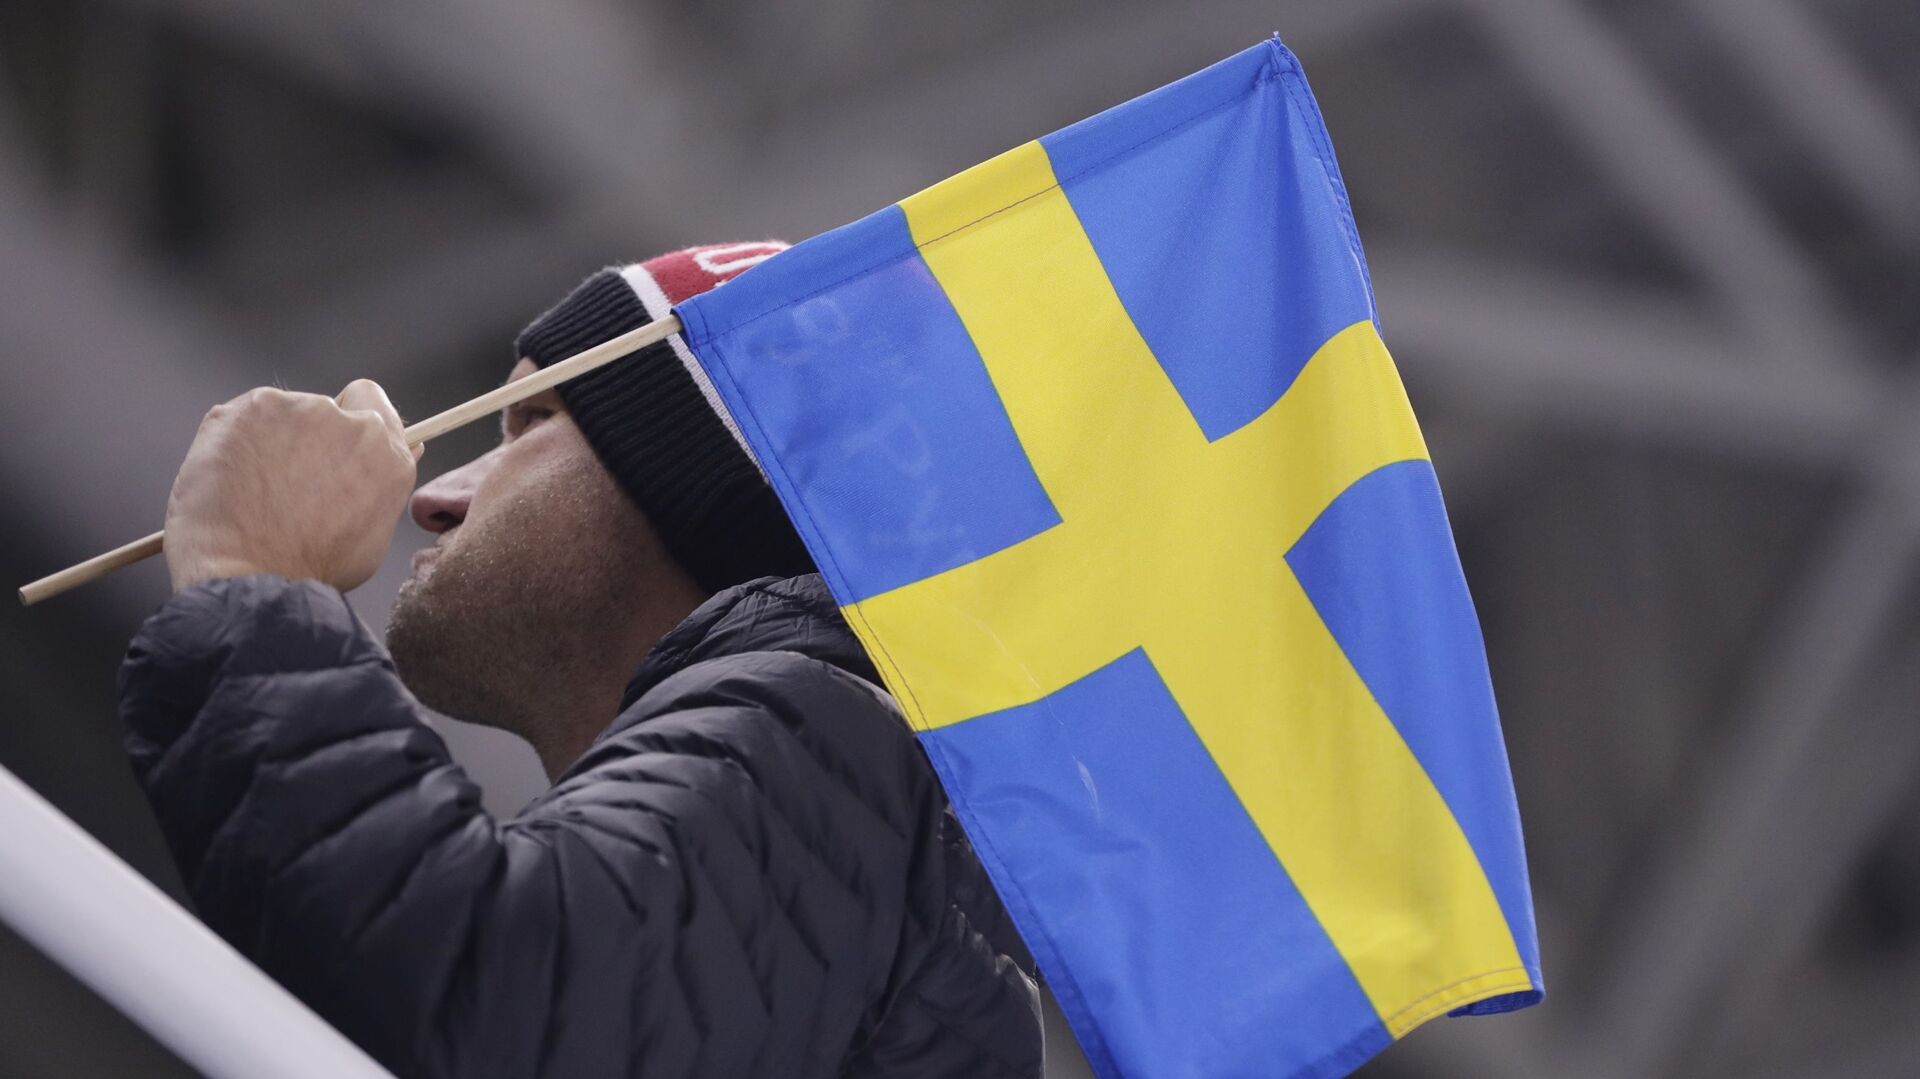 A man poses with a Swedish flag before the preliminary round of the men's hockey game between Sweden and Finland at the 2018 Winter Olympics in Gangneung, South Korea, 18 February 2018 - Sputnik International, 1920, 07.06.2021